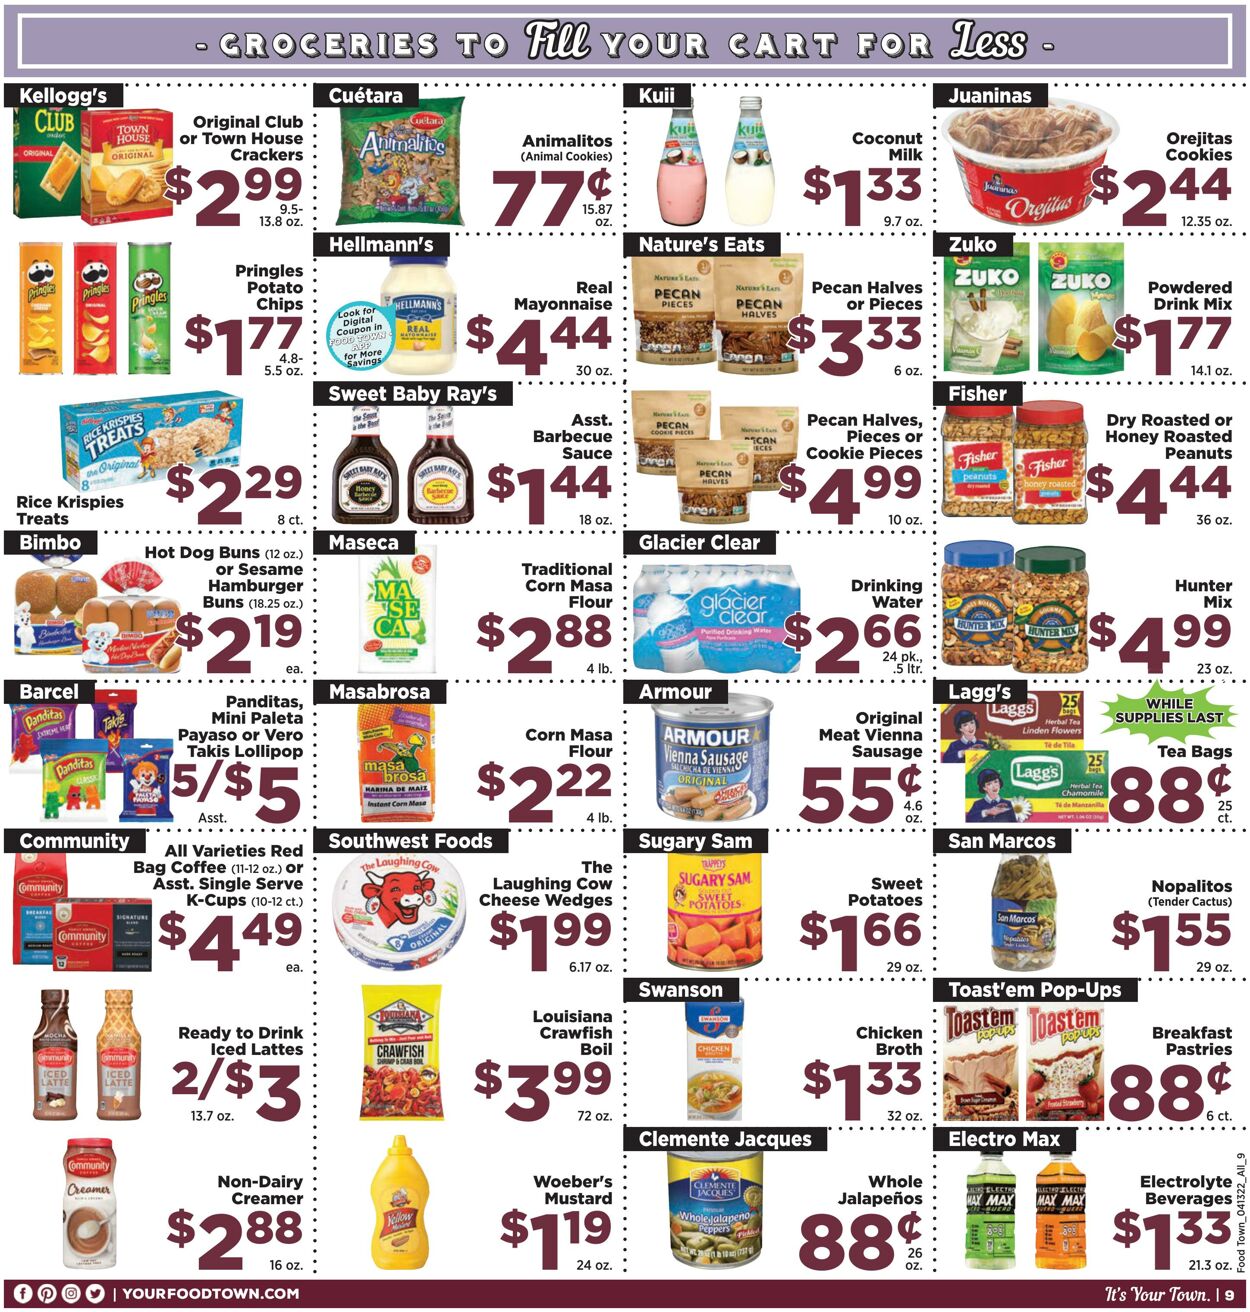 Weekly ad Your Food Town 04/13/2022 - 04/19/2022